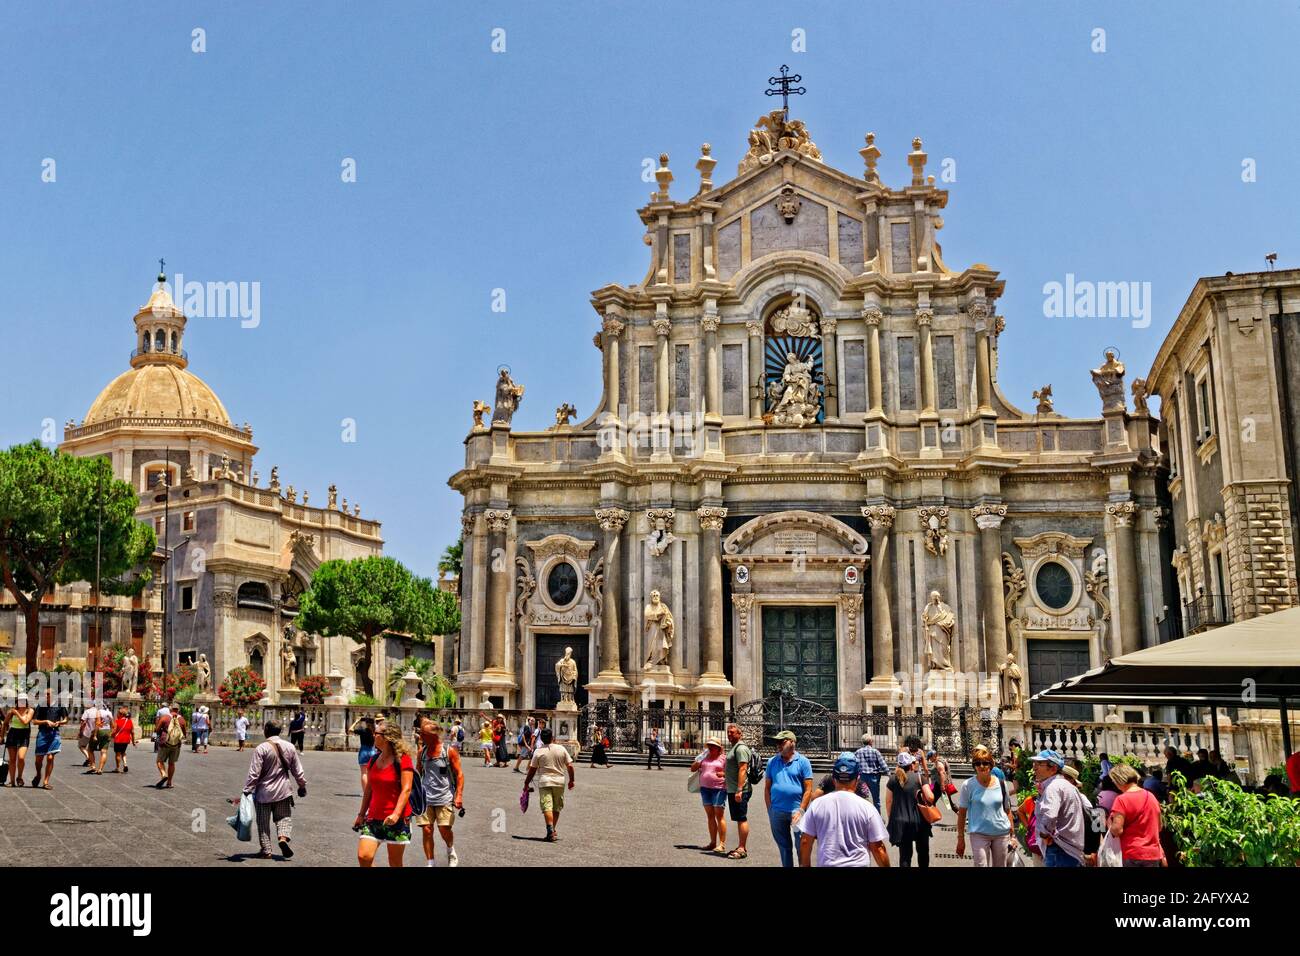 Catania St Agatha High Resolution Stock Photography and Images - Alamy